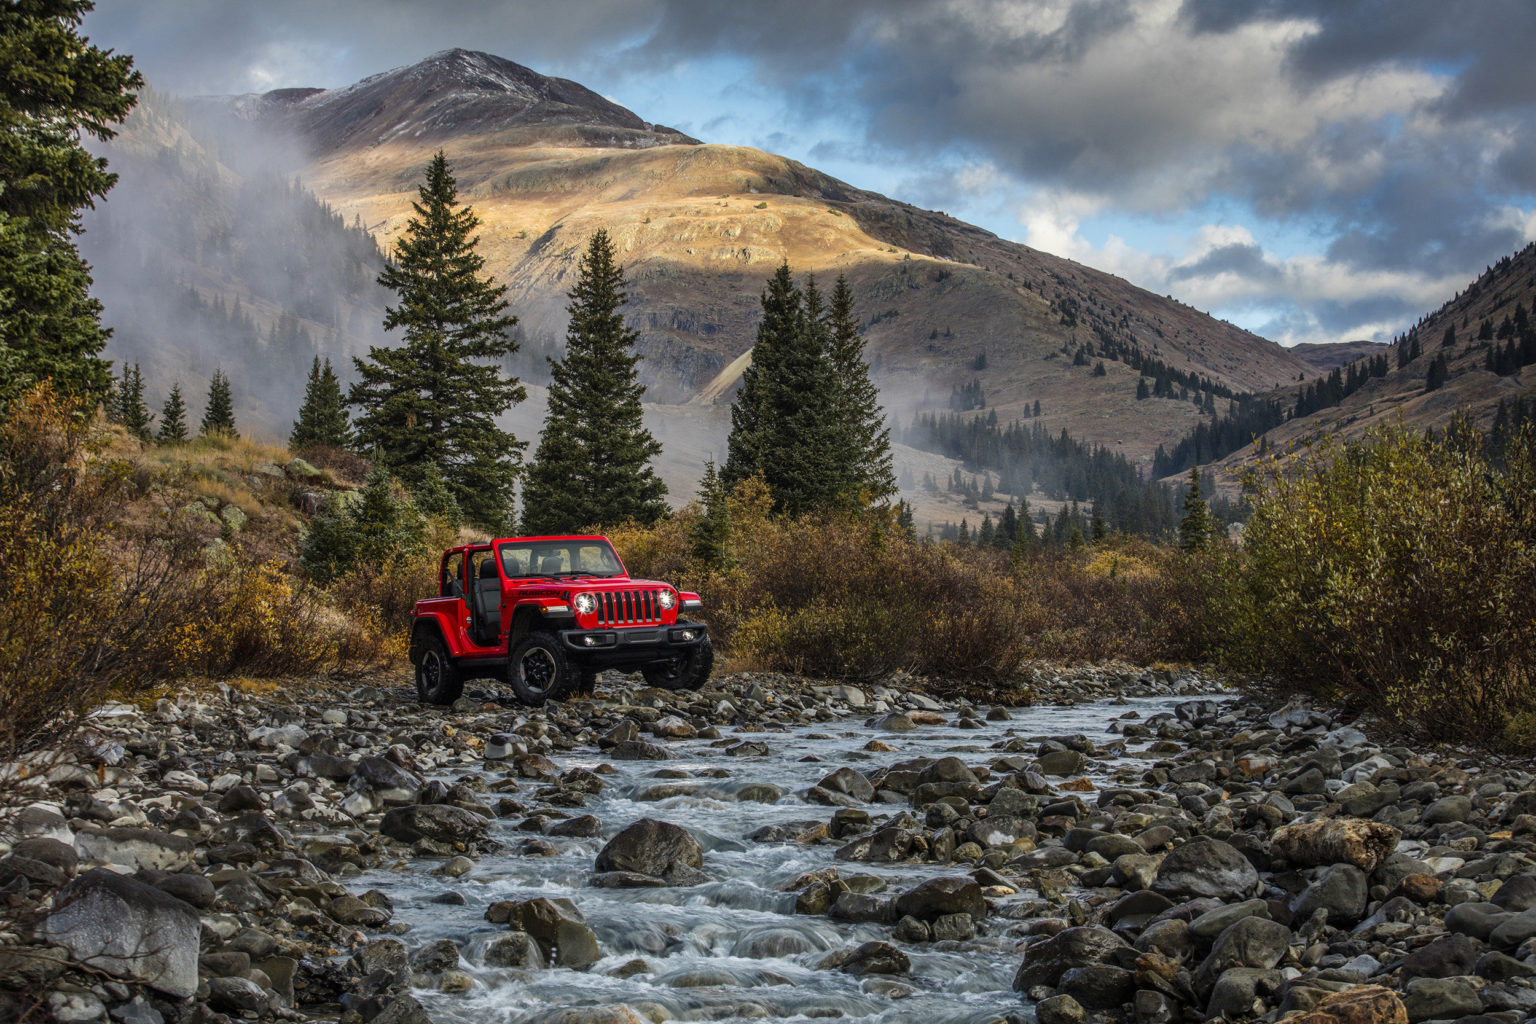 The Jeep Wrangler continues to be a formidable off-roader with modern creature comforts.